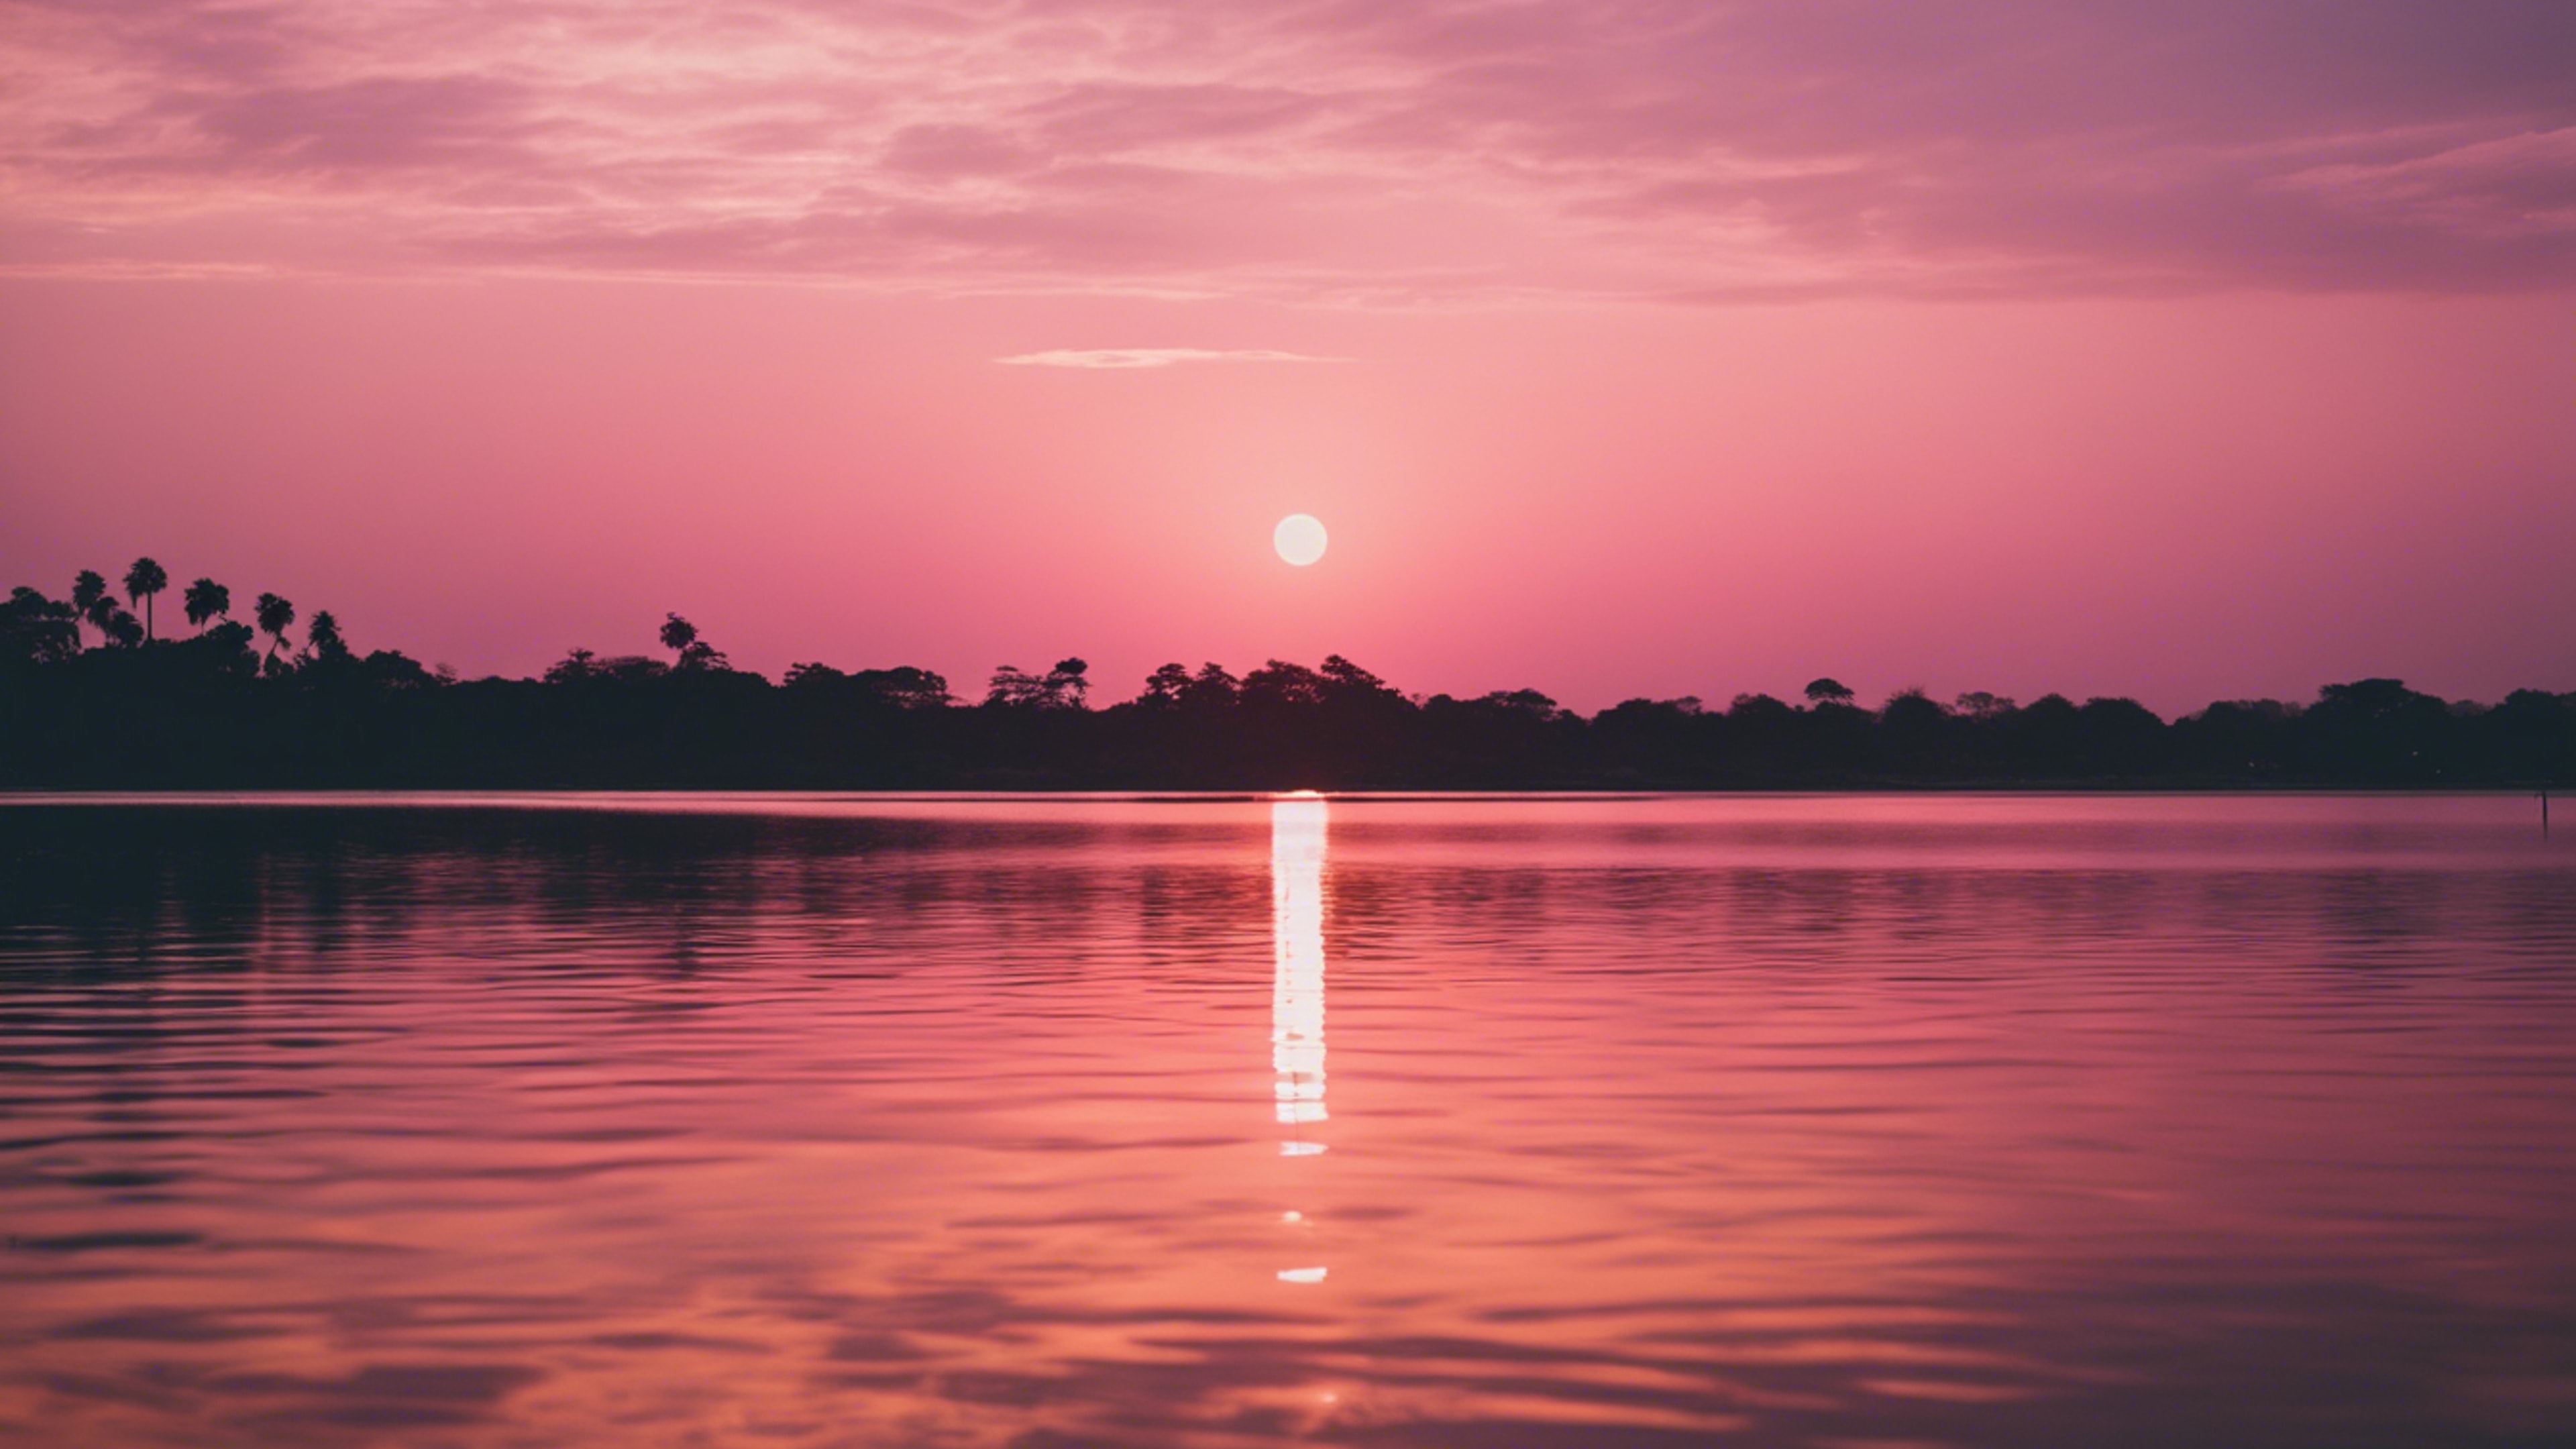 A picturesque pink and gold sunset reflecting on tranquil lagoon waters. Ταπετσαρία[938883e46b5847a4931b]